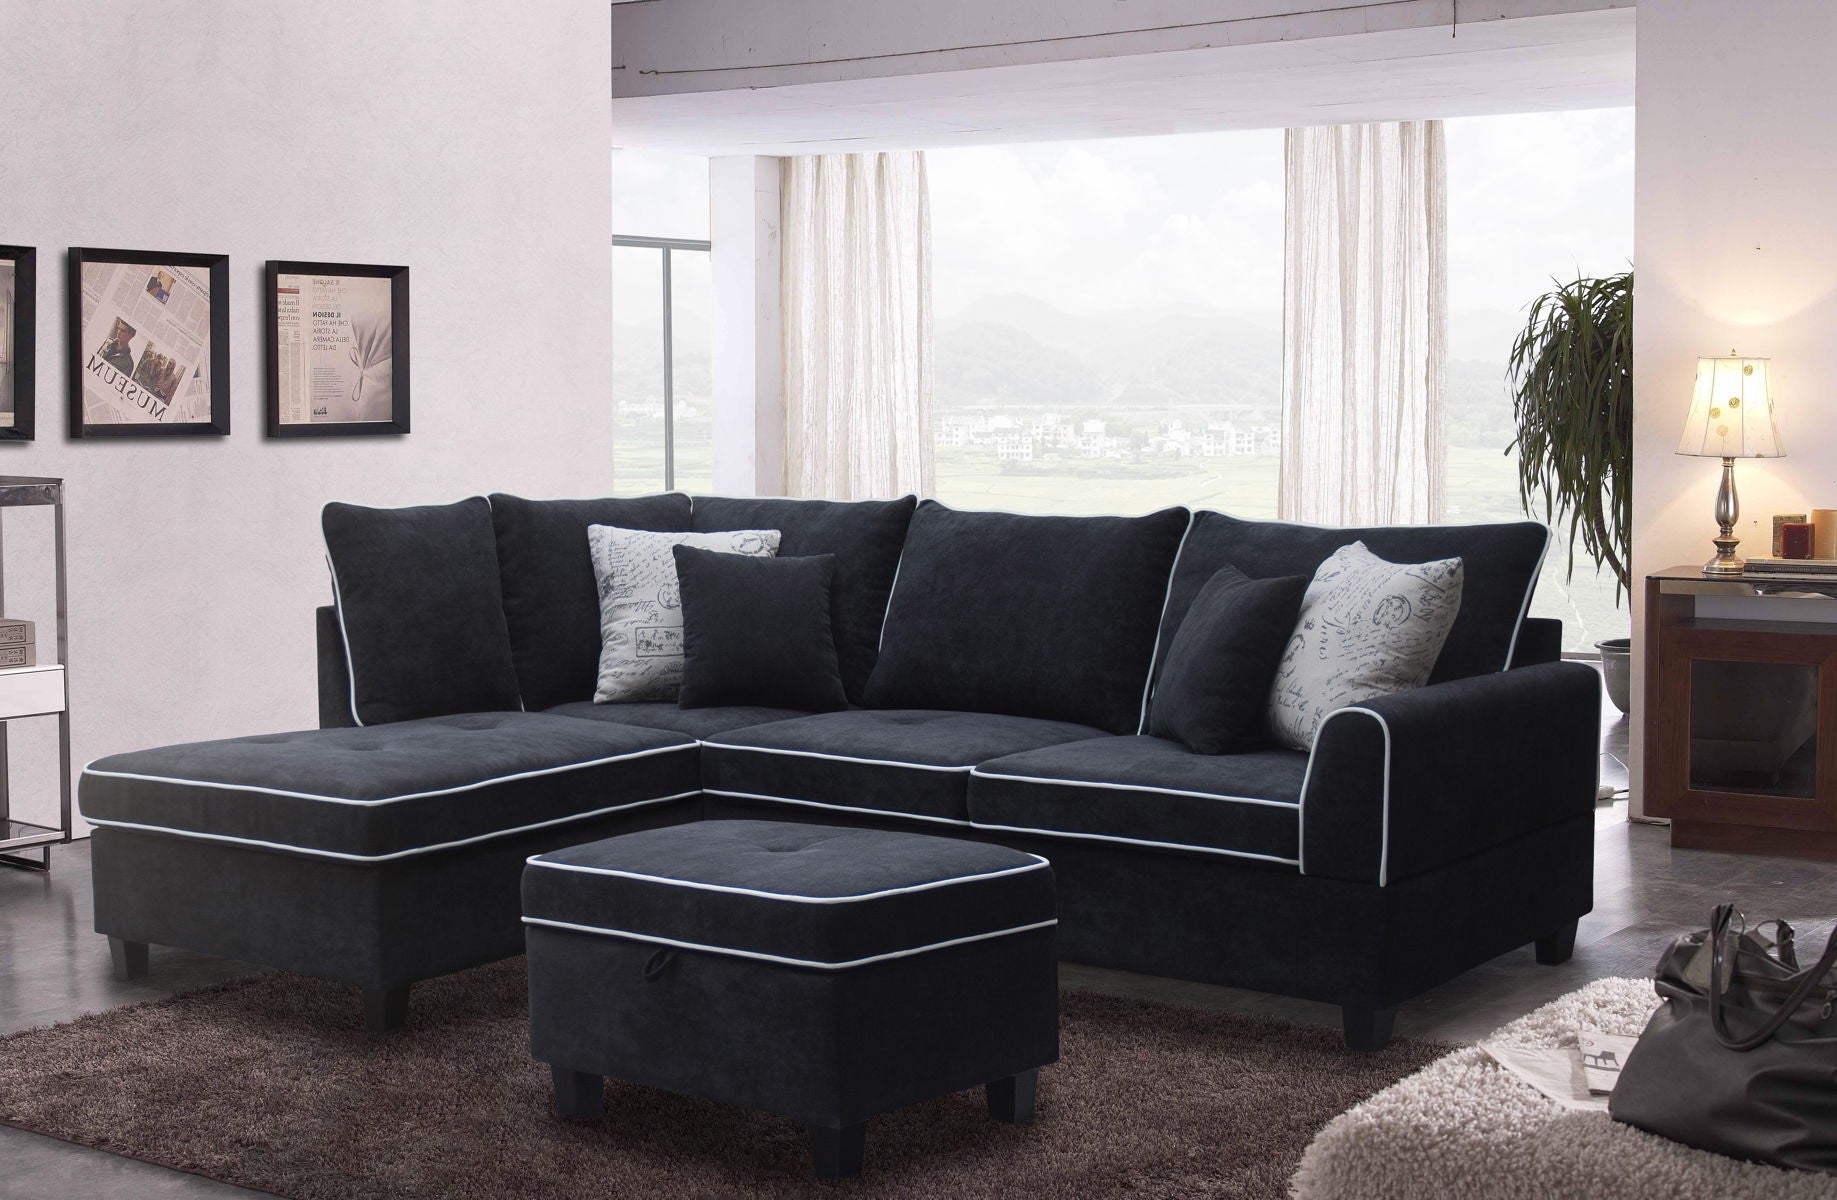 Harmony - Fabric Sectional Sofa With Left-Facing Chaise And Storage Ottoman